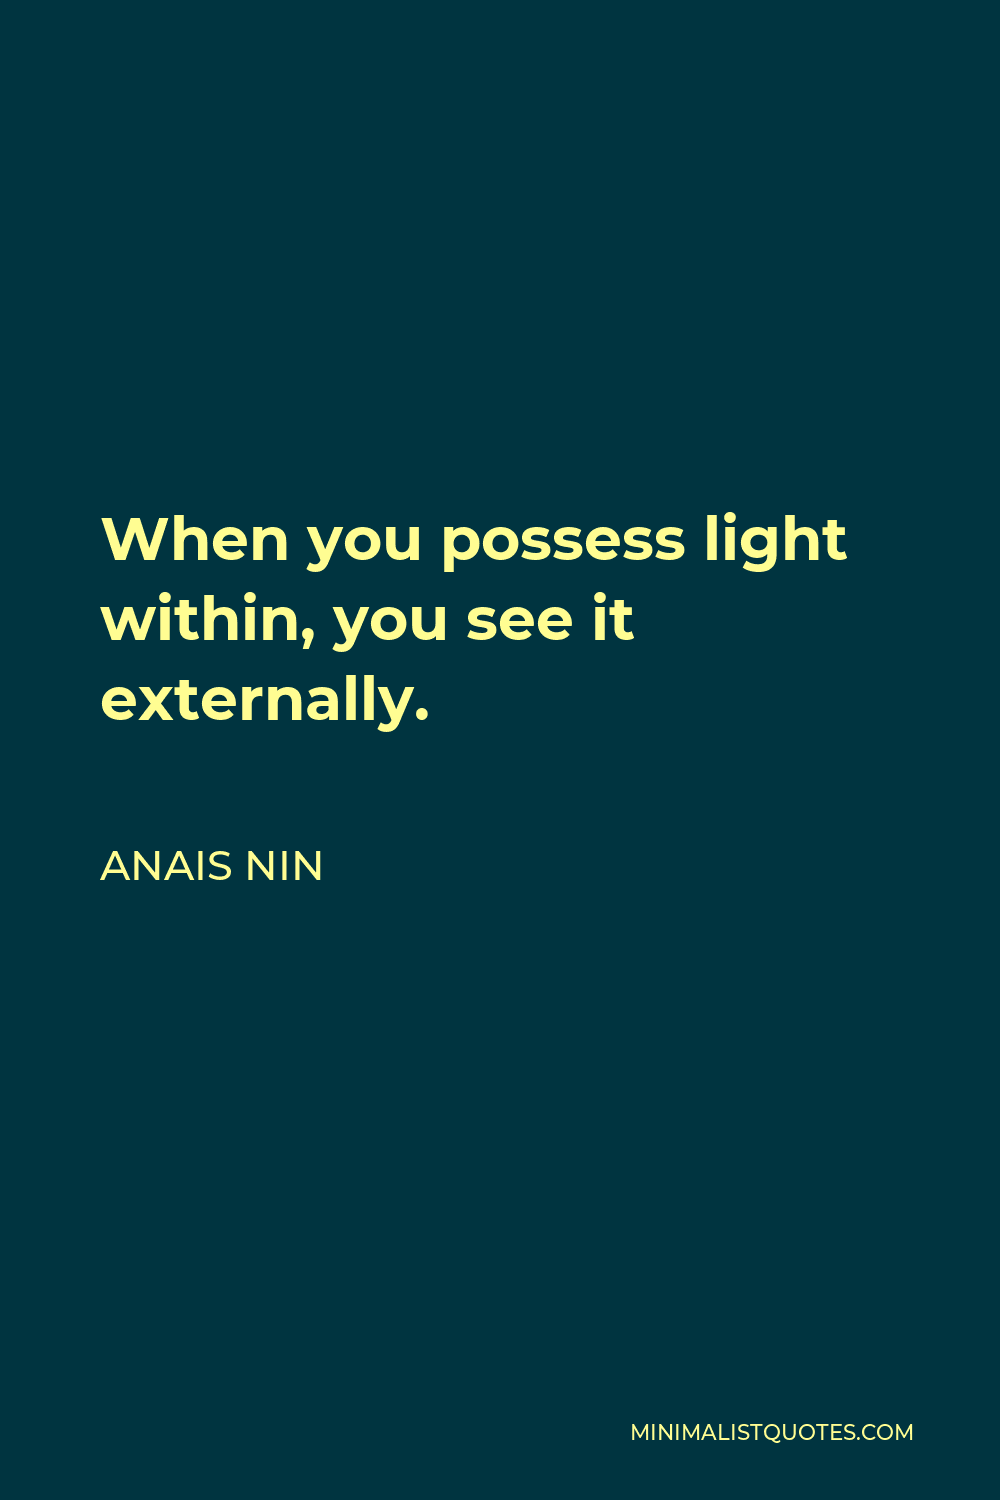 Anais Nin Quote - When you possess light within, you see it externally.